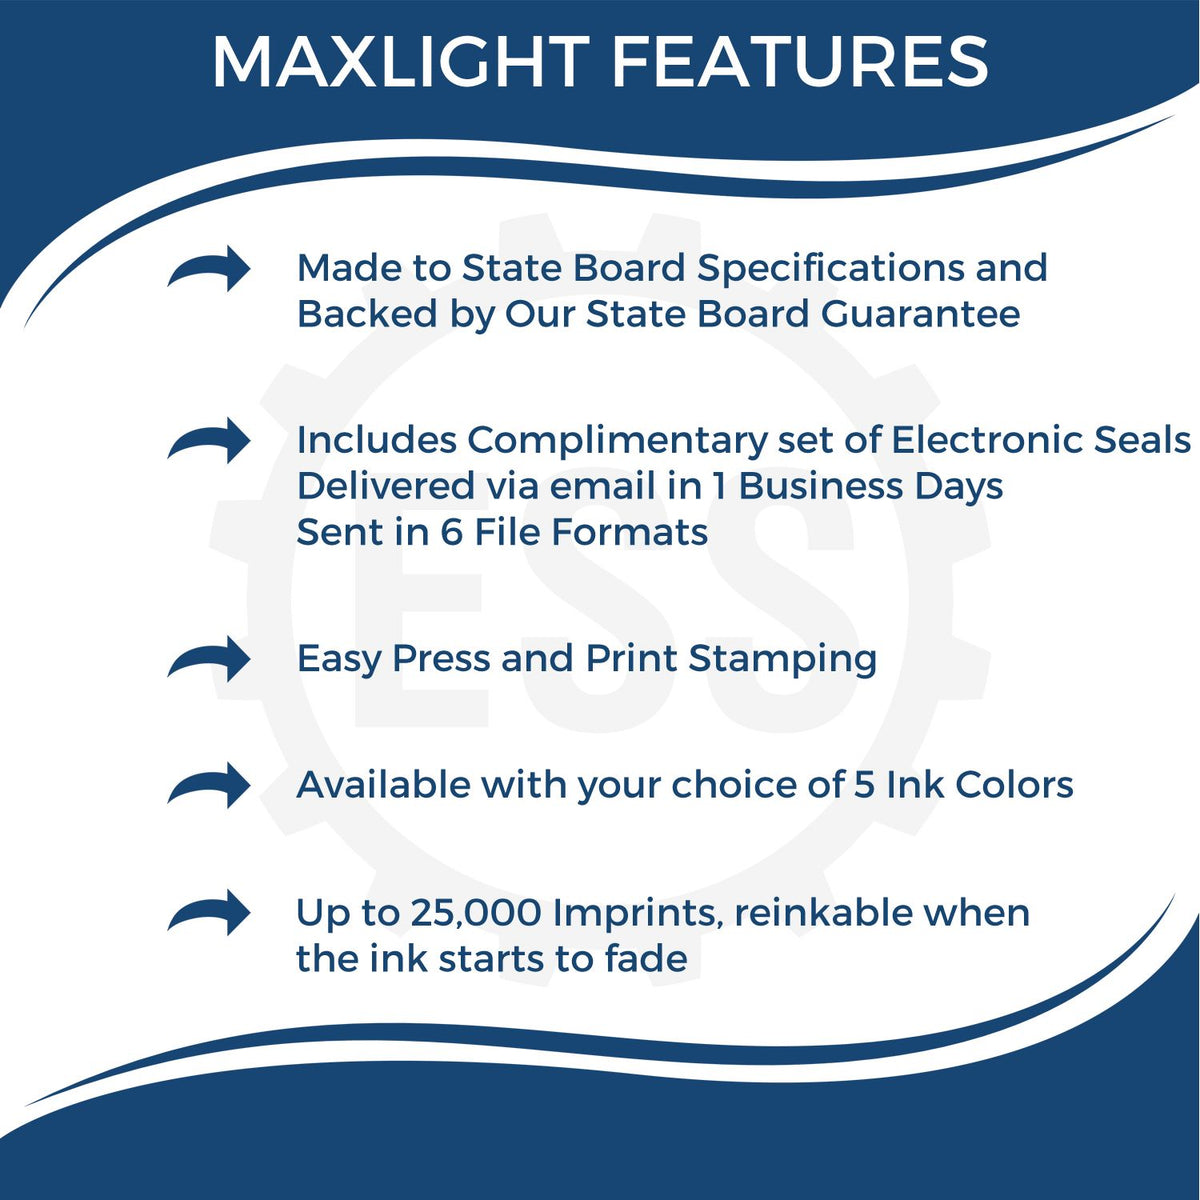 A picture of an infographic highlighting the selling points for the Premium MaxLight Pre-Inked Texas Engineering Stamp